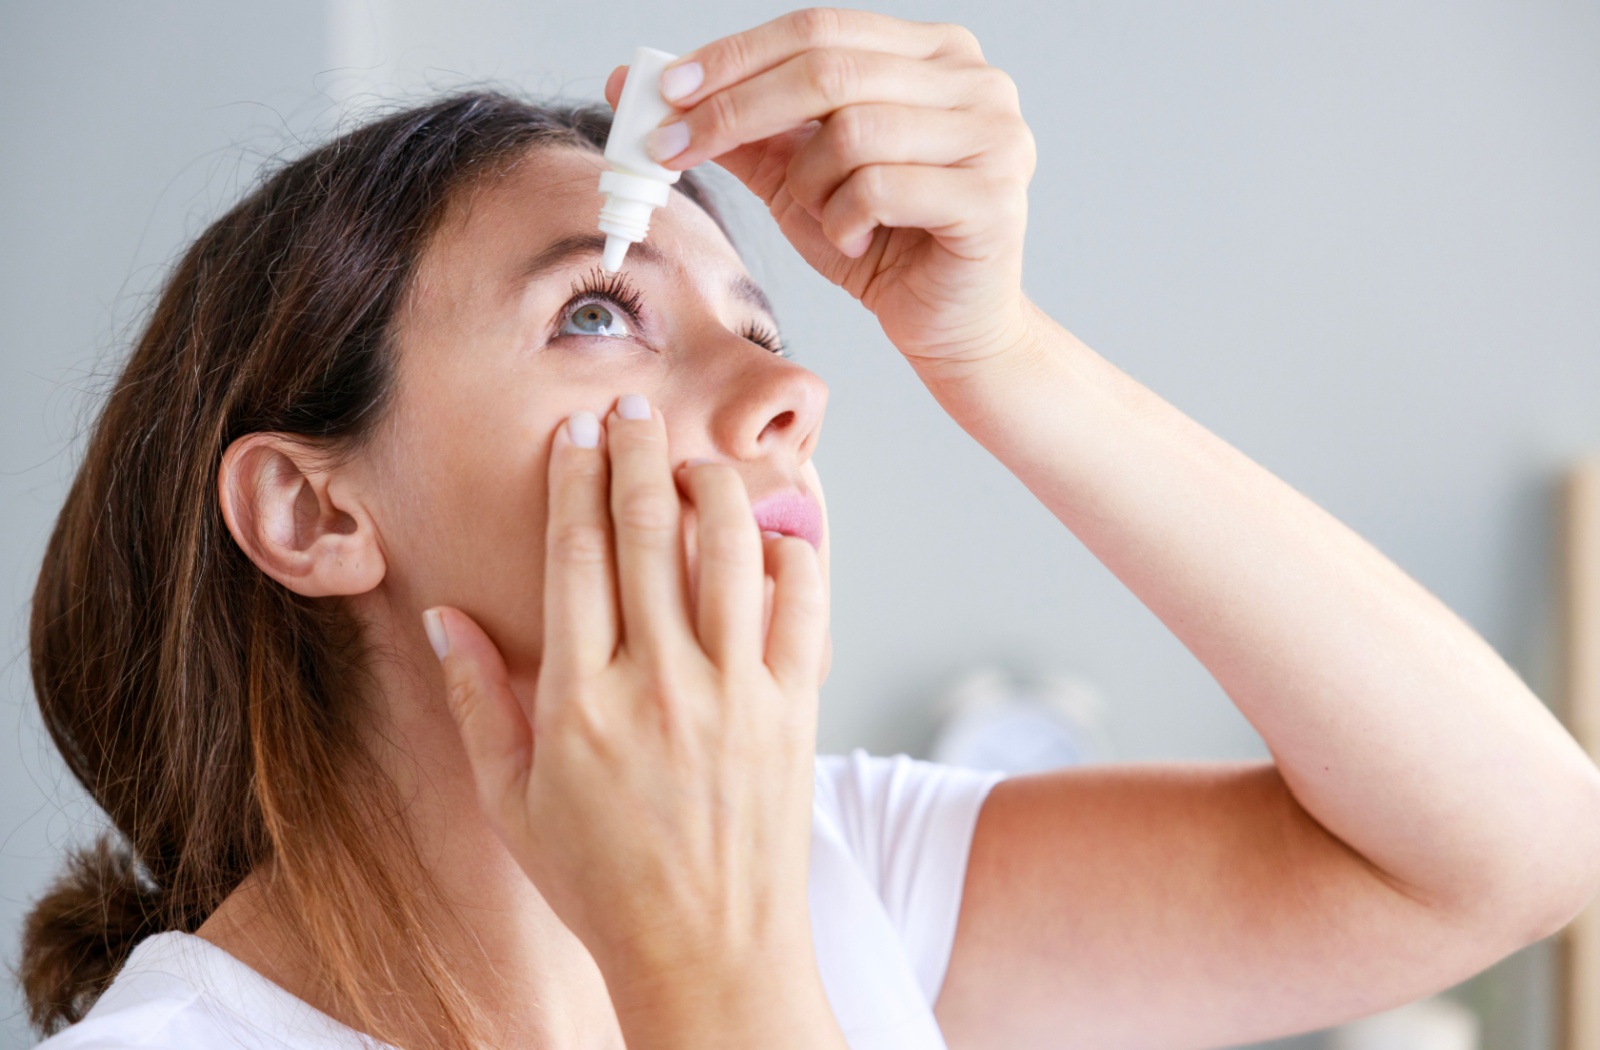 Woman putting non-expired eye drops in her right eye